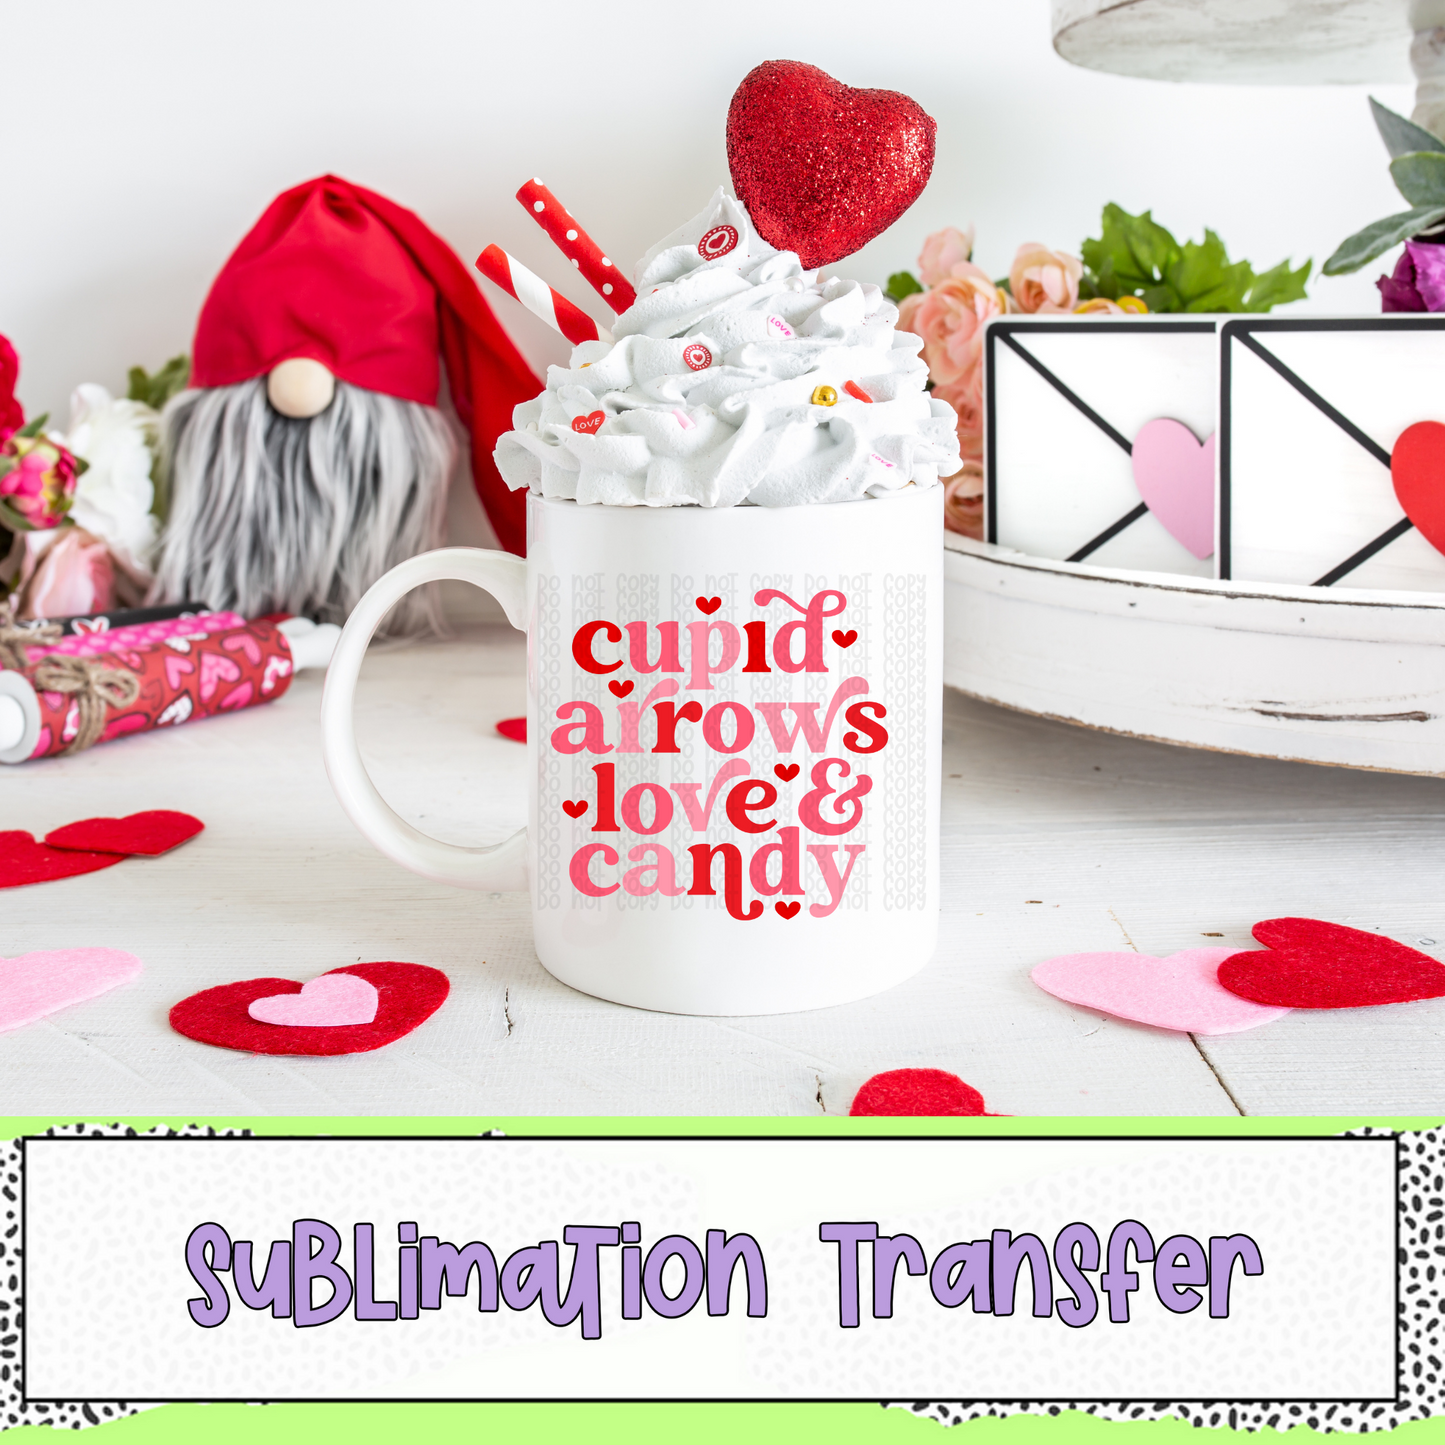 Cupid Arrows Love & Candy - SUBLIMATION TRANSFER